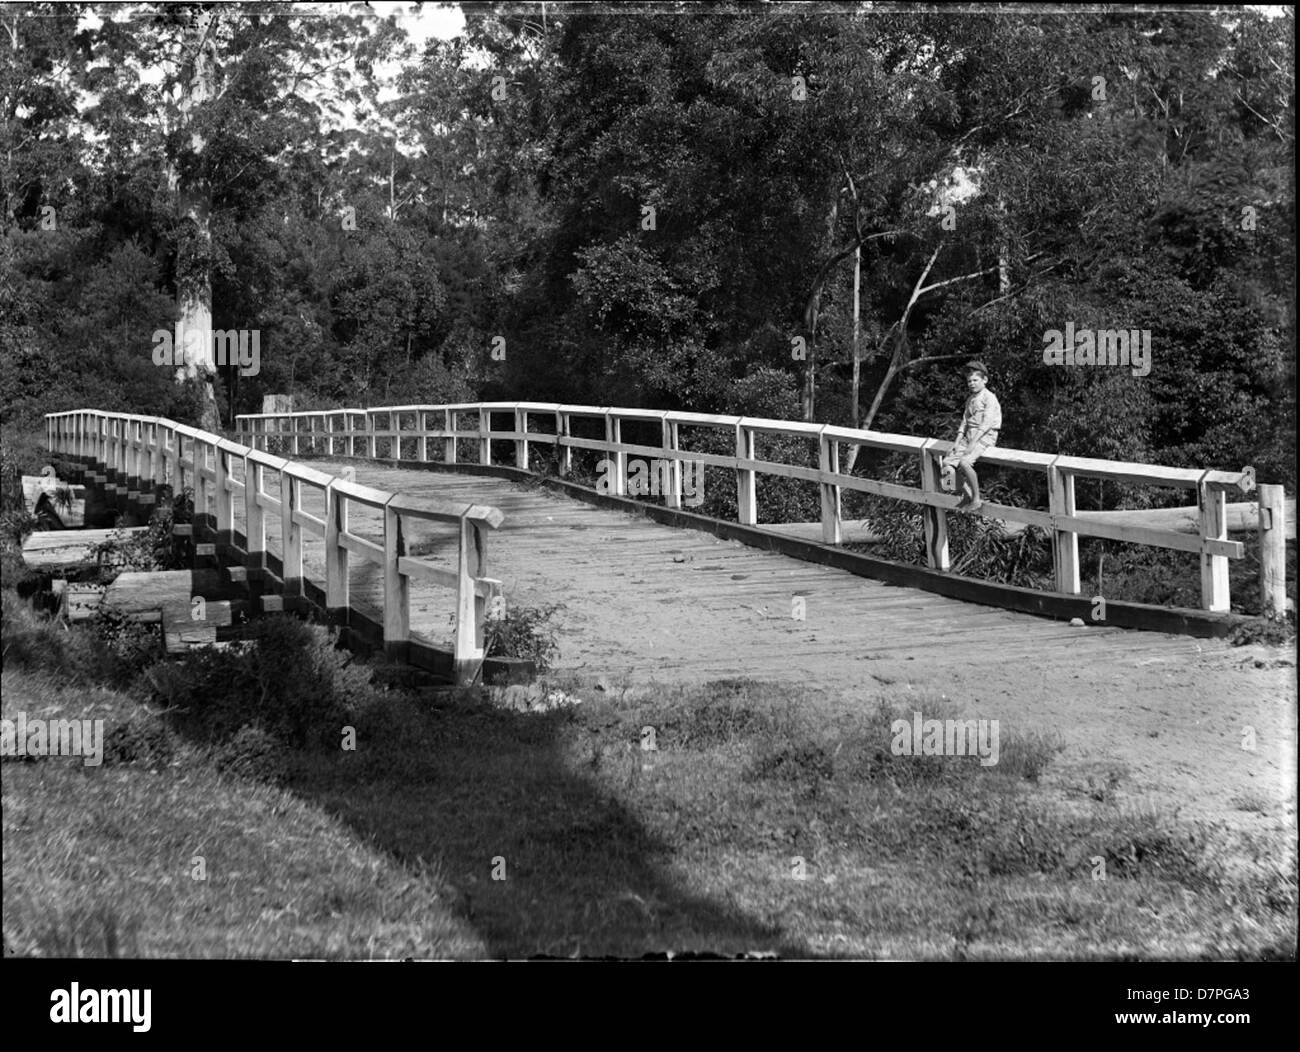 View of wooden bridge with small boy seated on fence Stock Photo